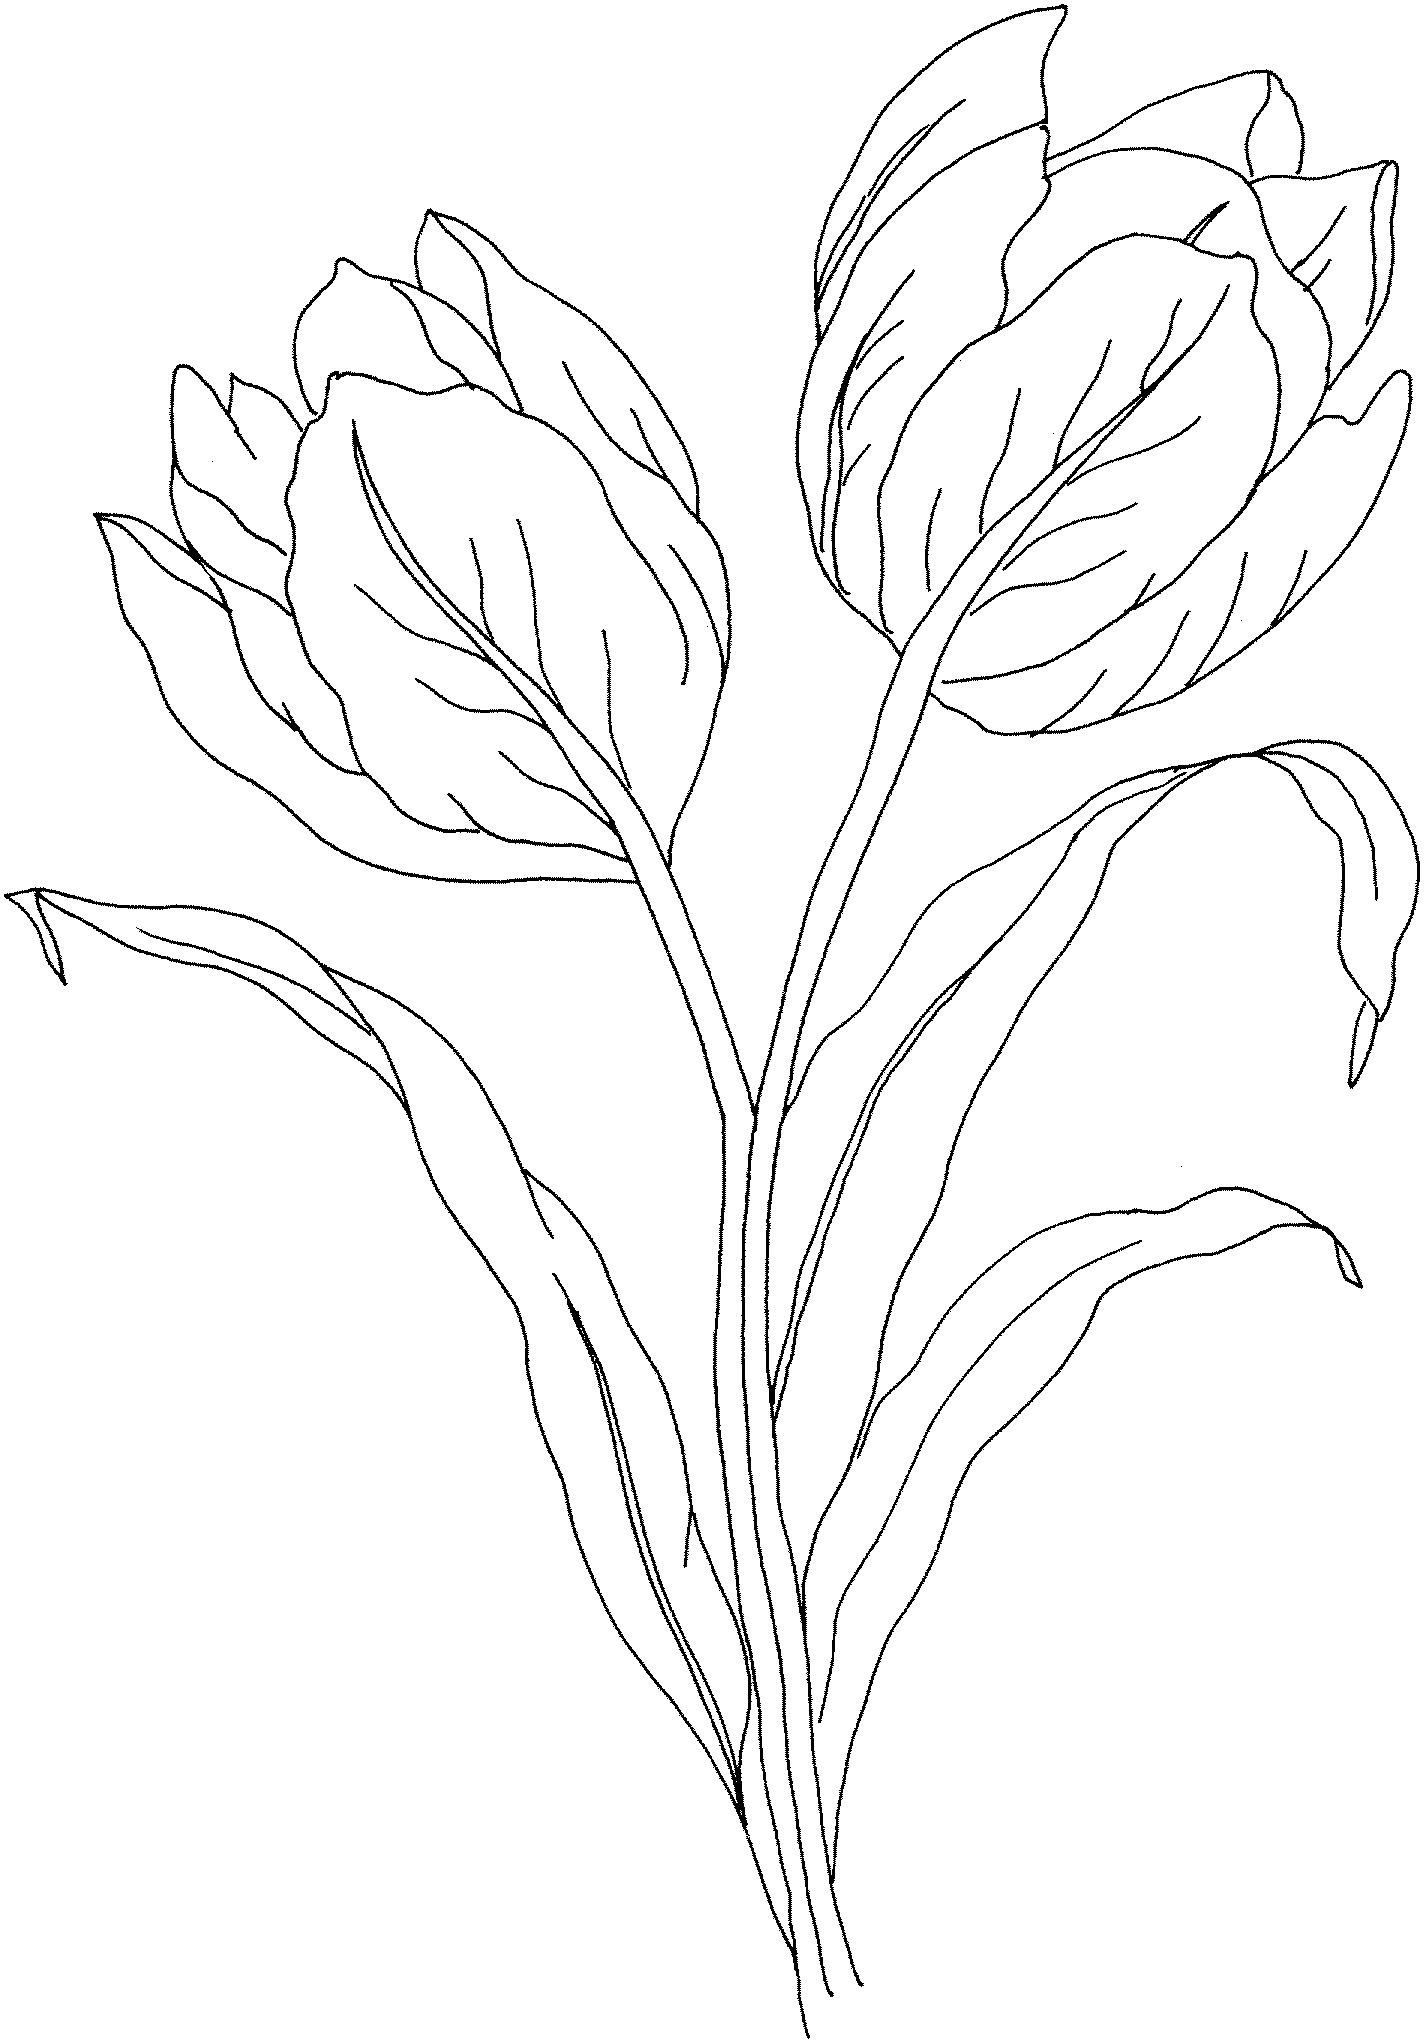 10+ Simple Tulip Coloring Pages